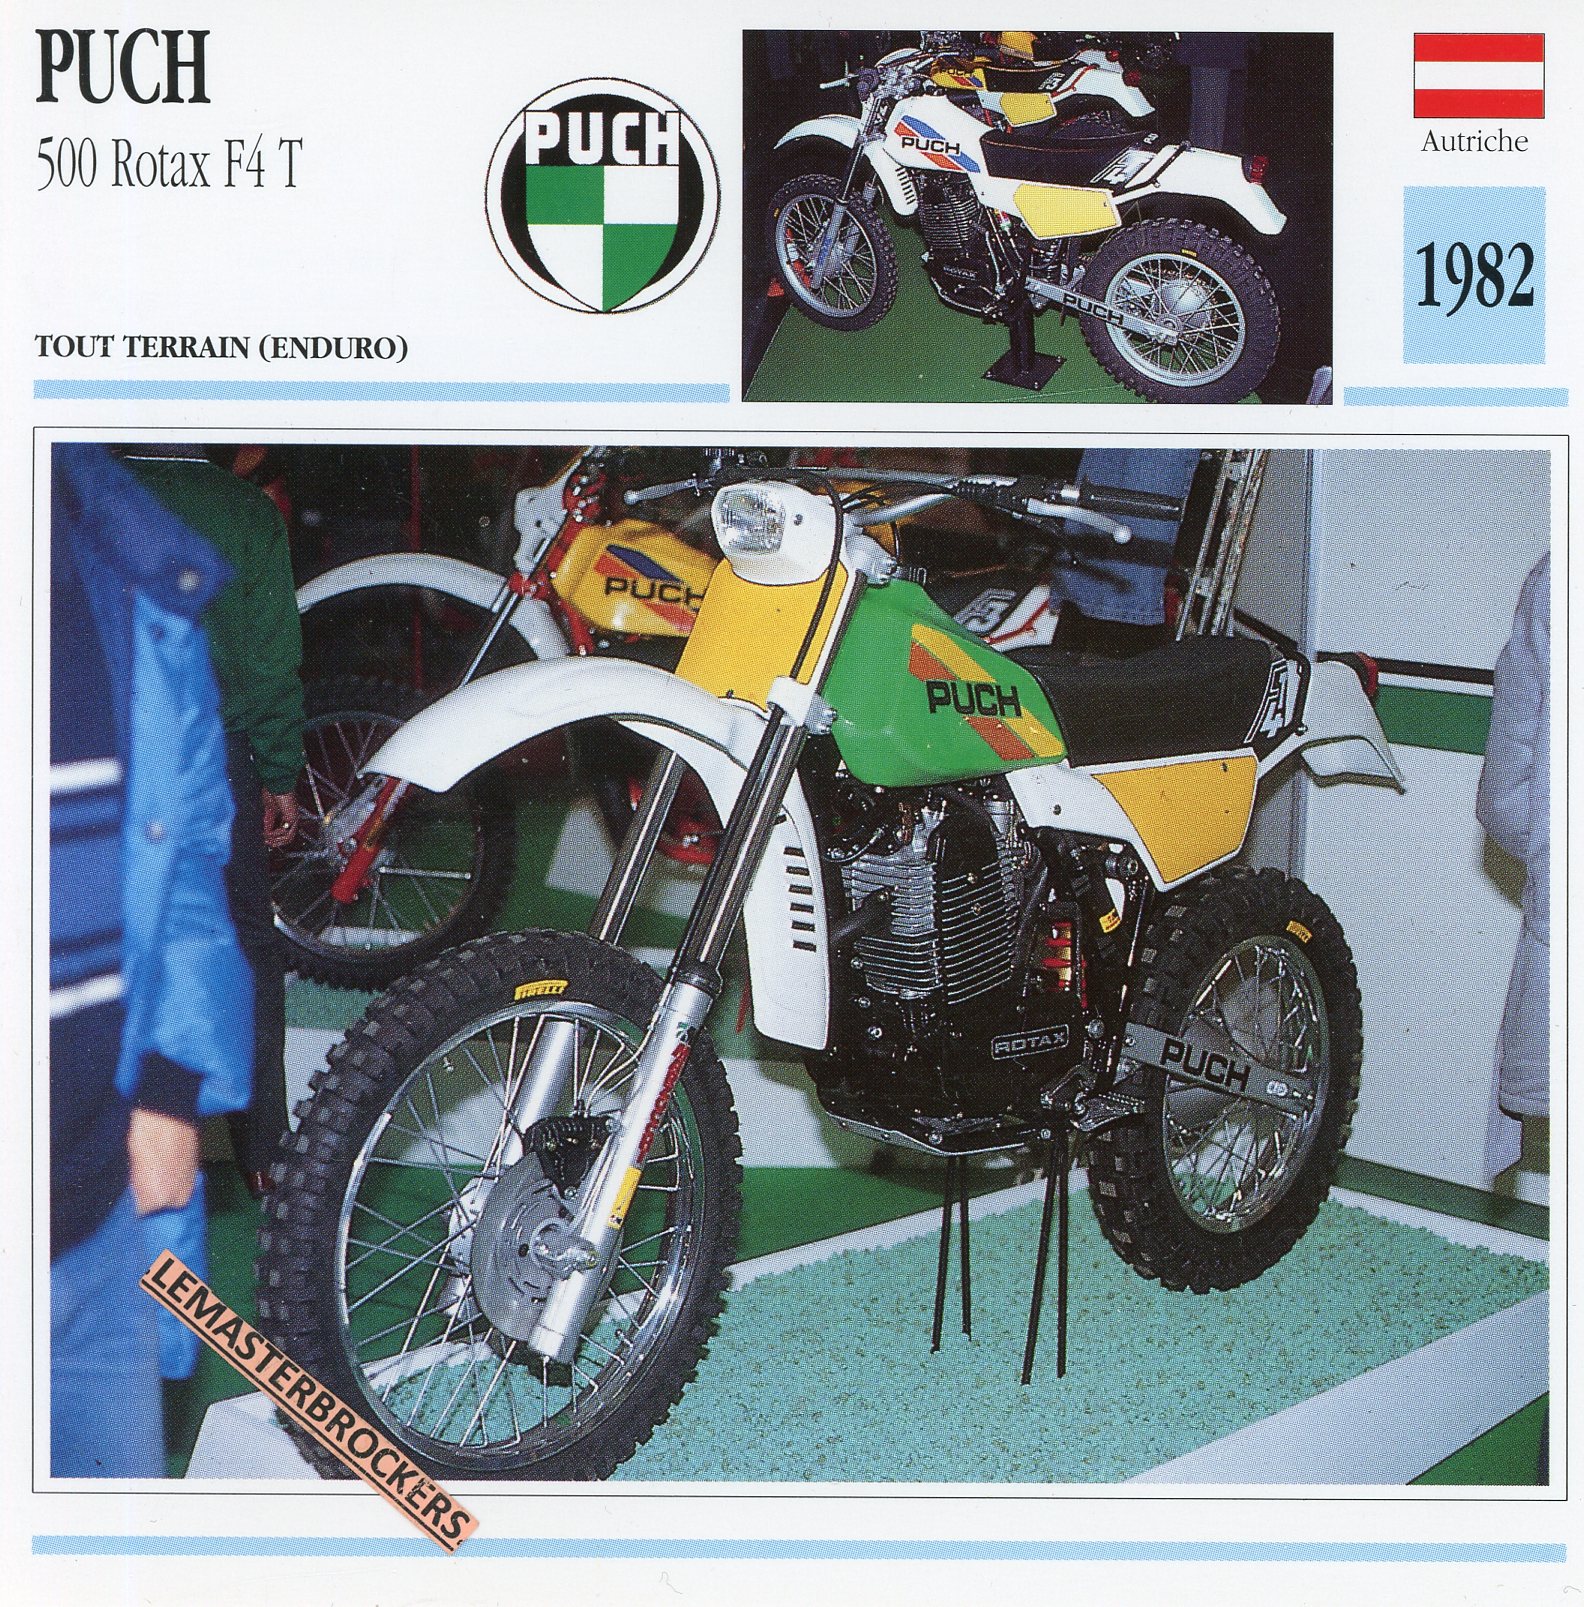 PUCH-500-ROTAX-F4T-1982-FICHE-MOTO-ENDURO-MOTORCYCLE-CARDS-ATLAS-LEMASTERBROCKERS